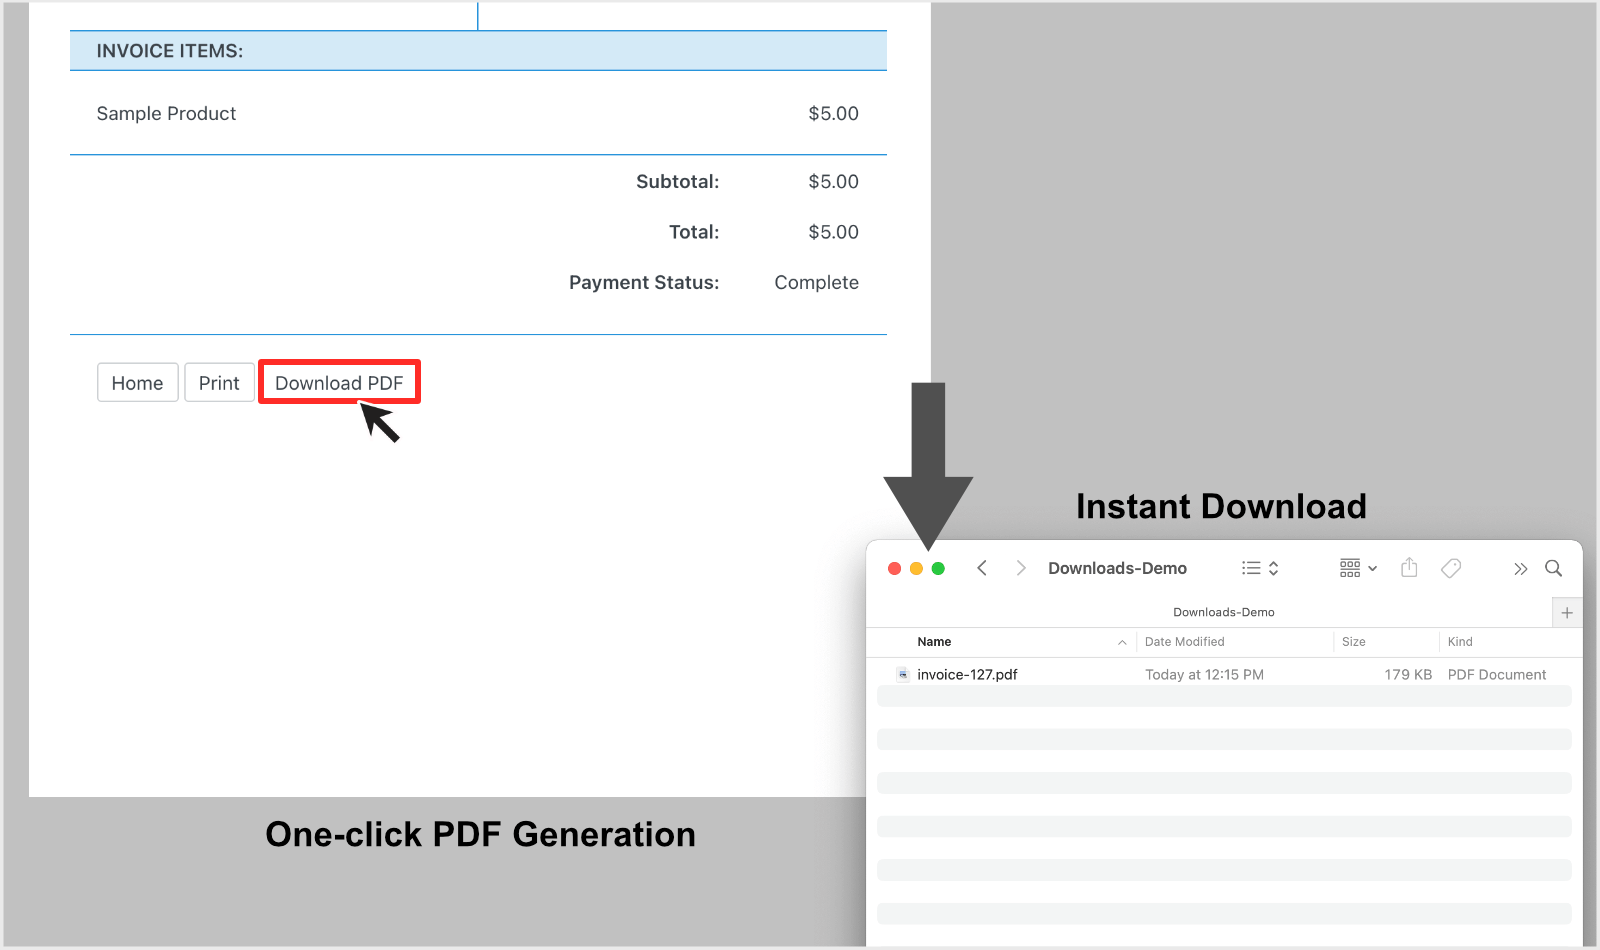 Illustration: one-click PDF generation and download